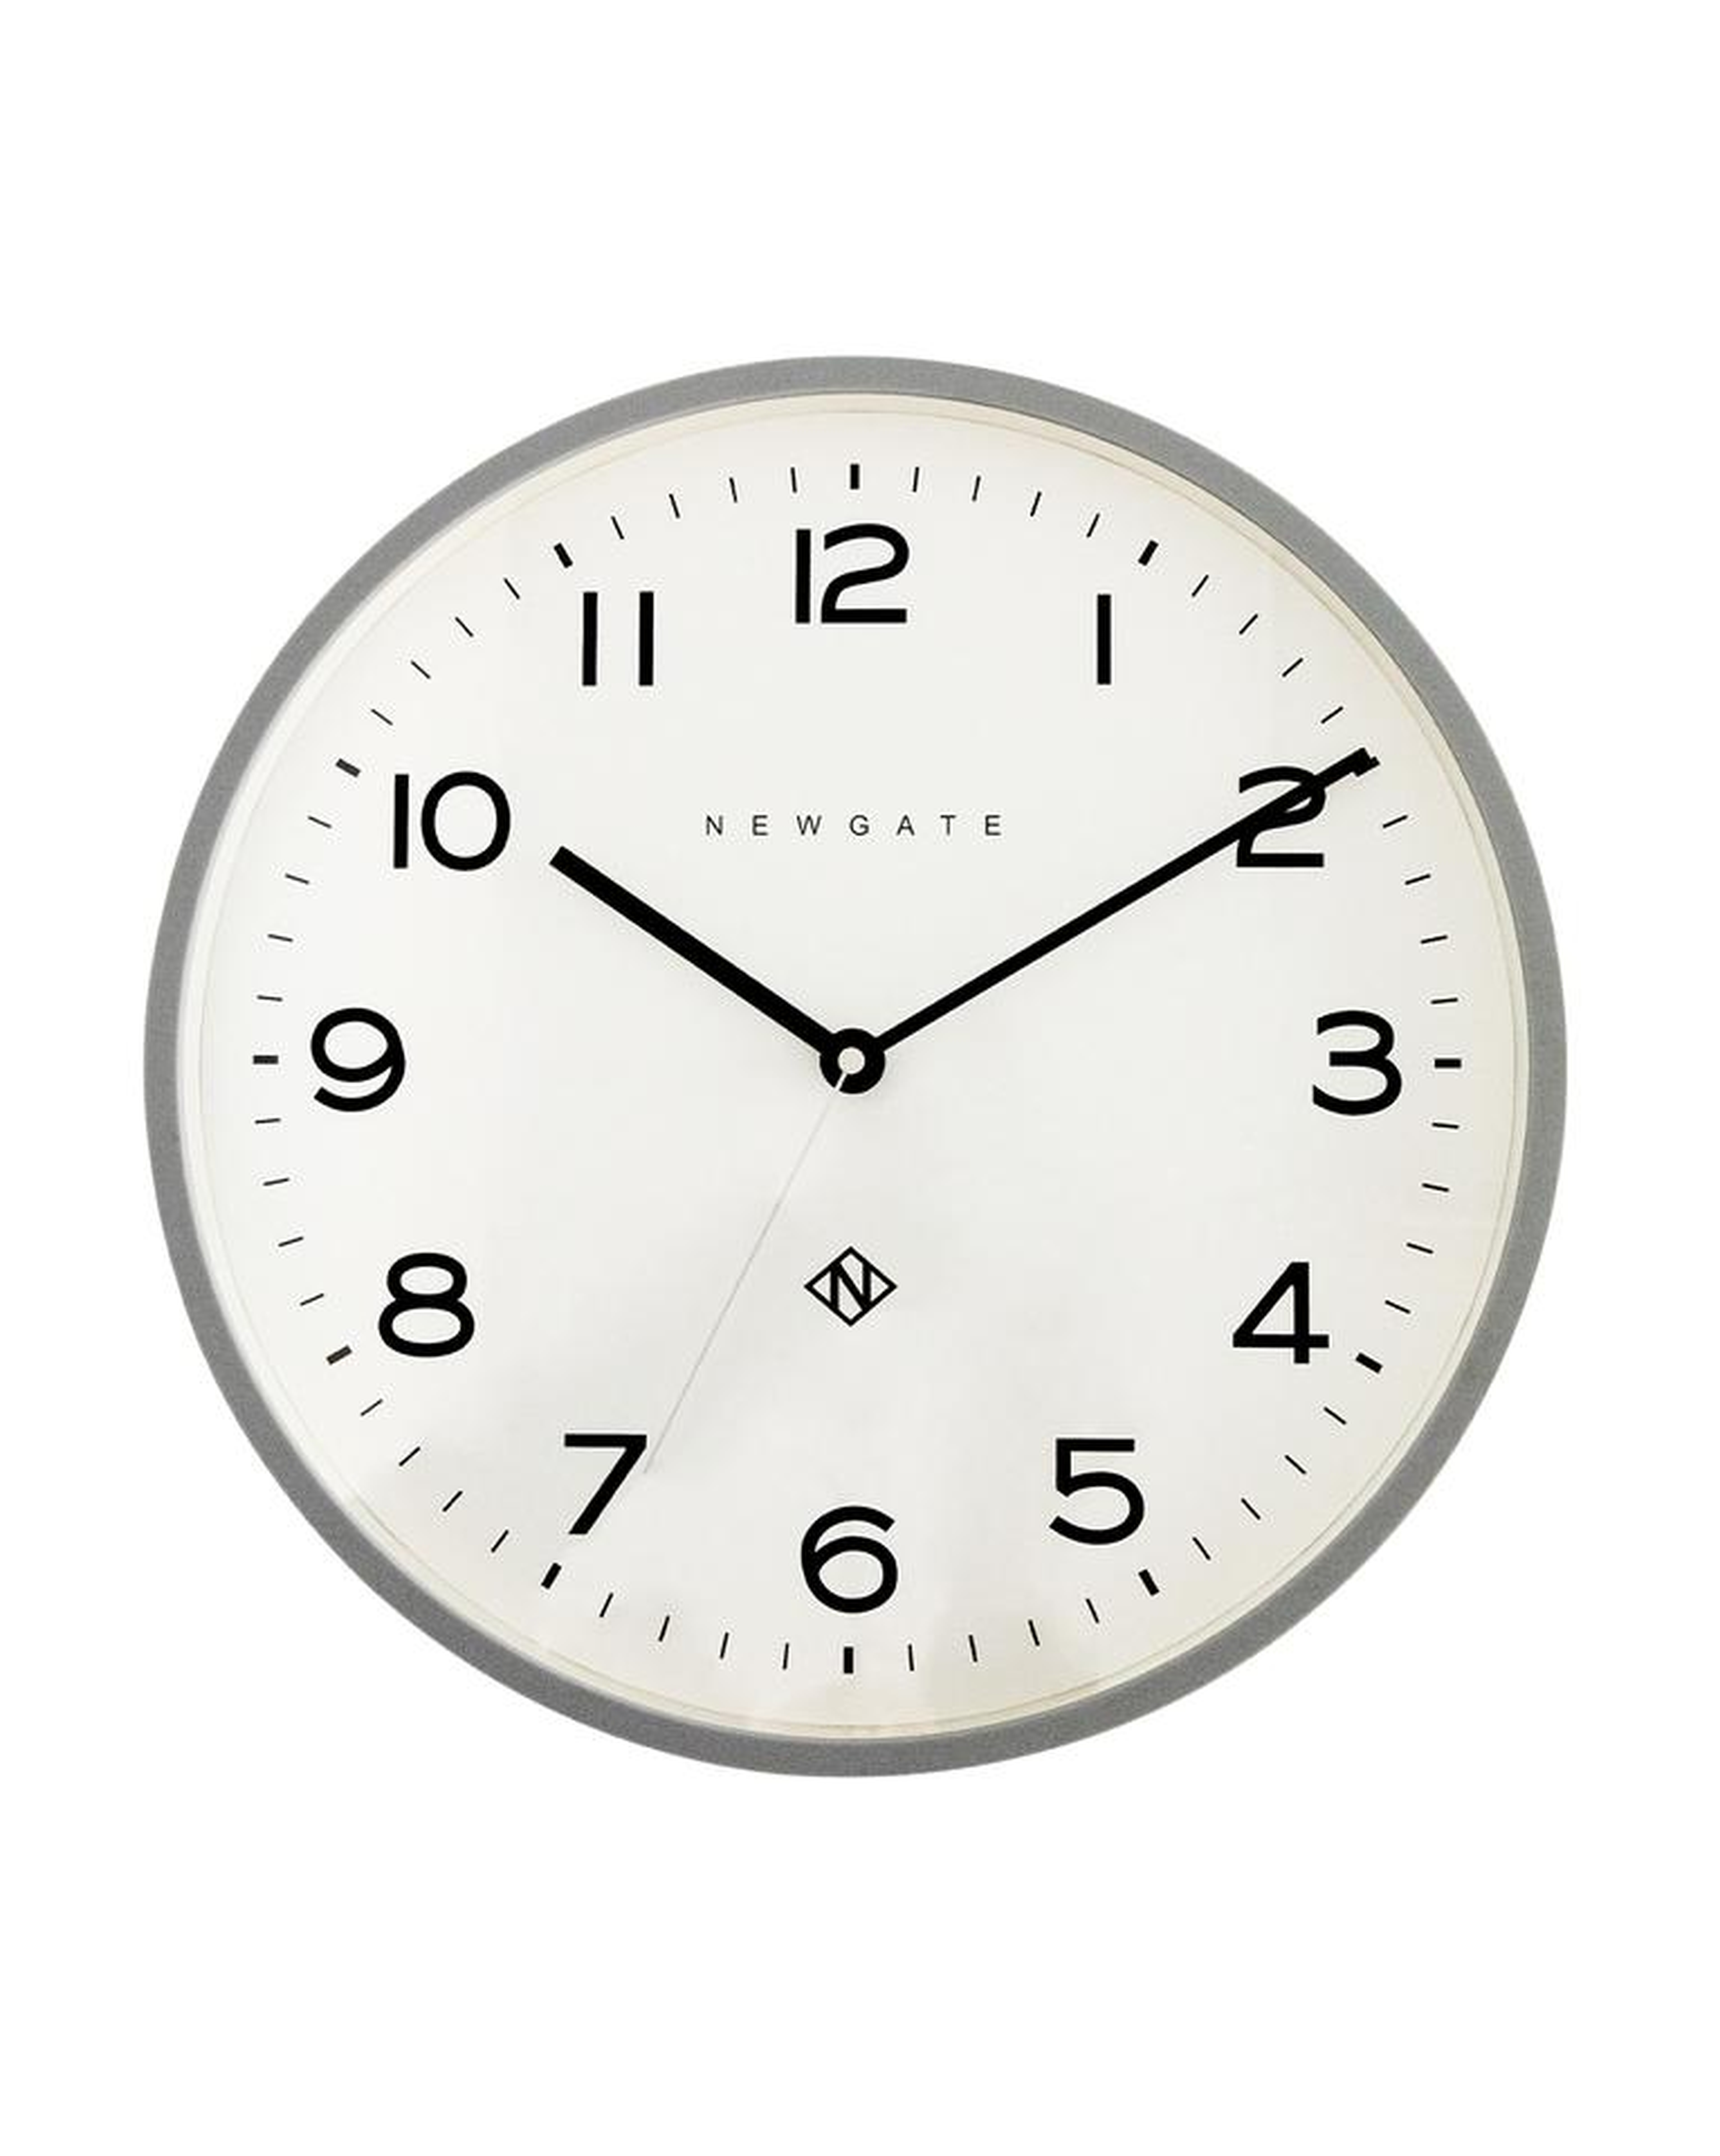 Moscow Wall Clock - McGee & Co.